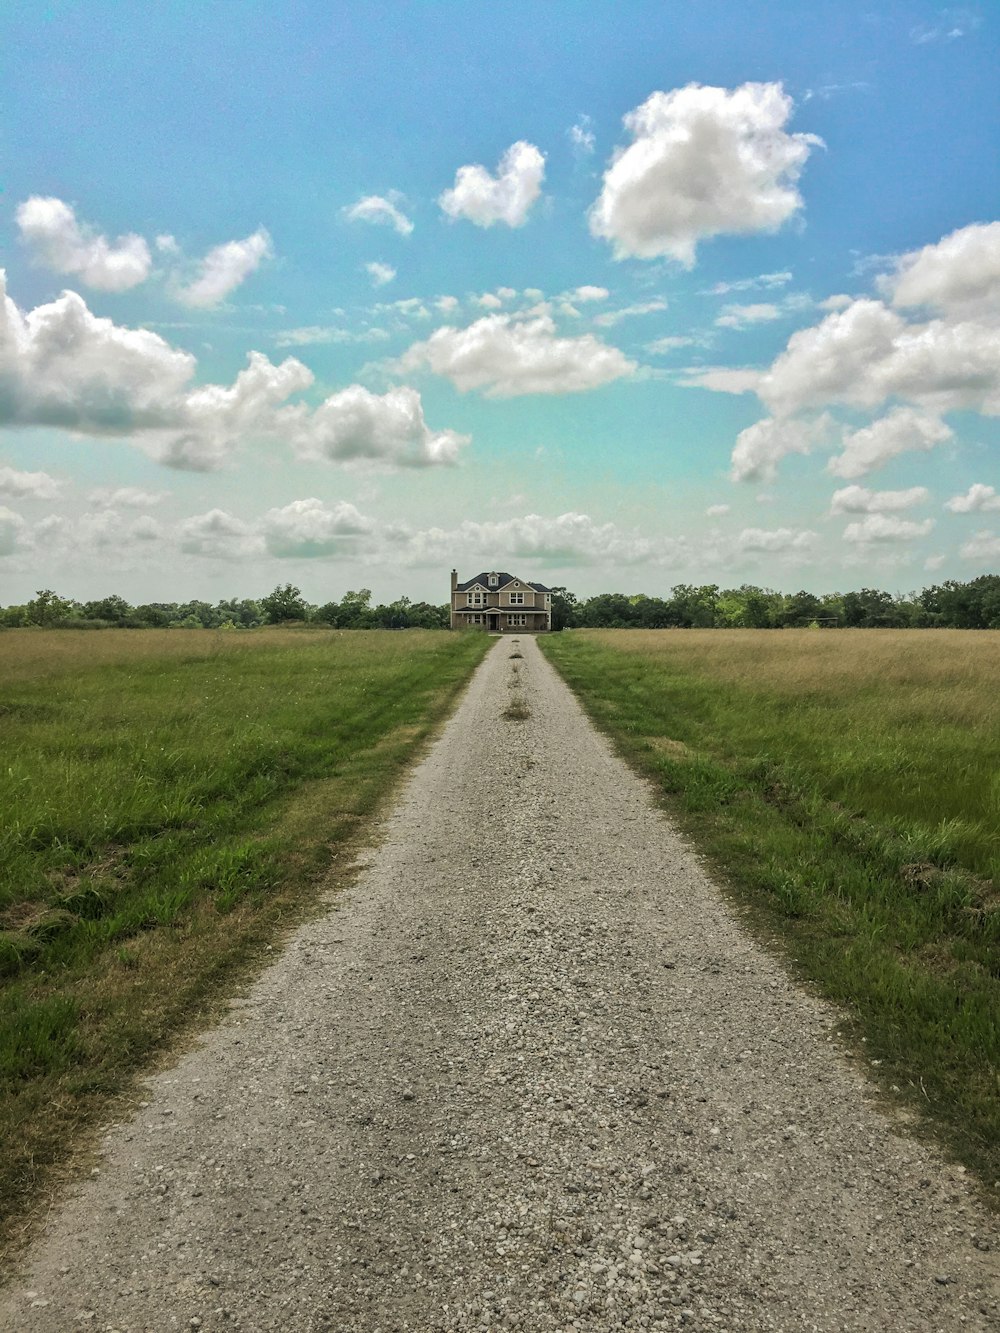 a dirt road with a house in the distance